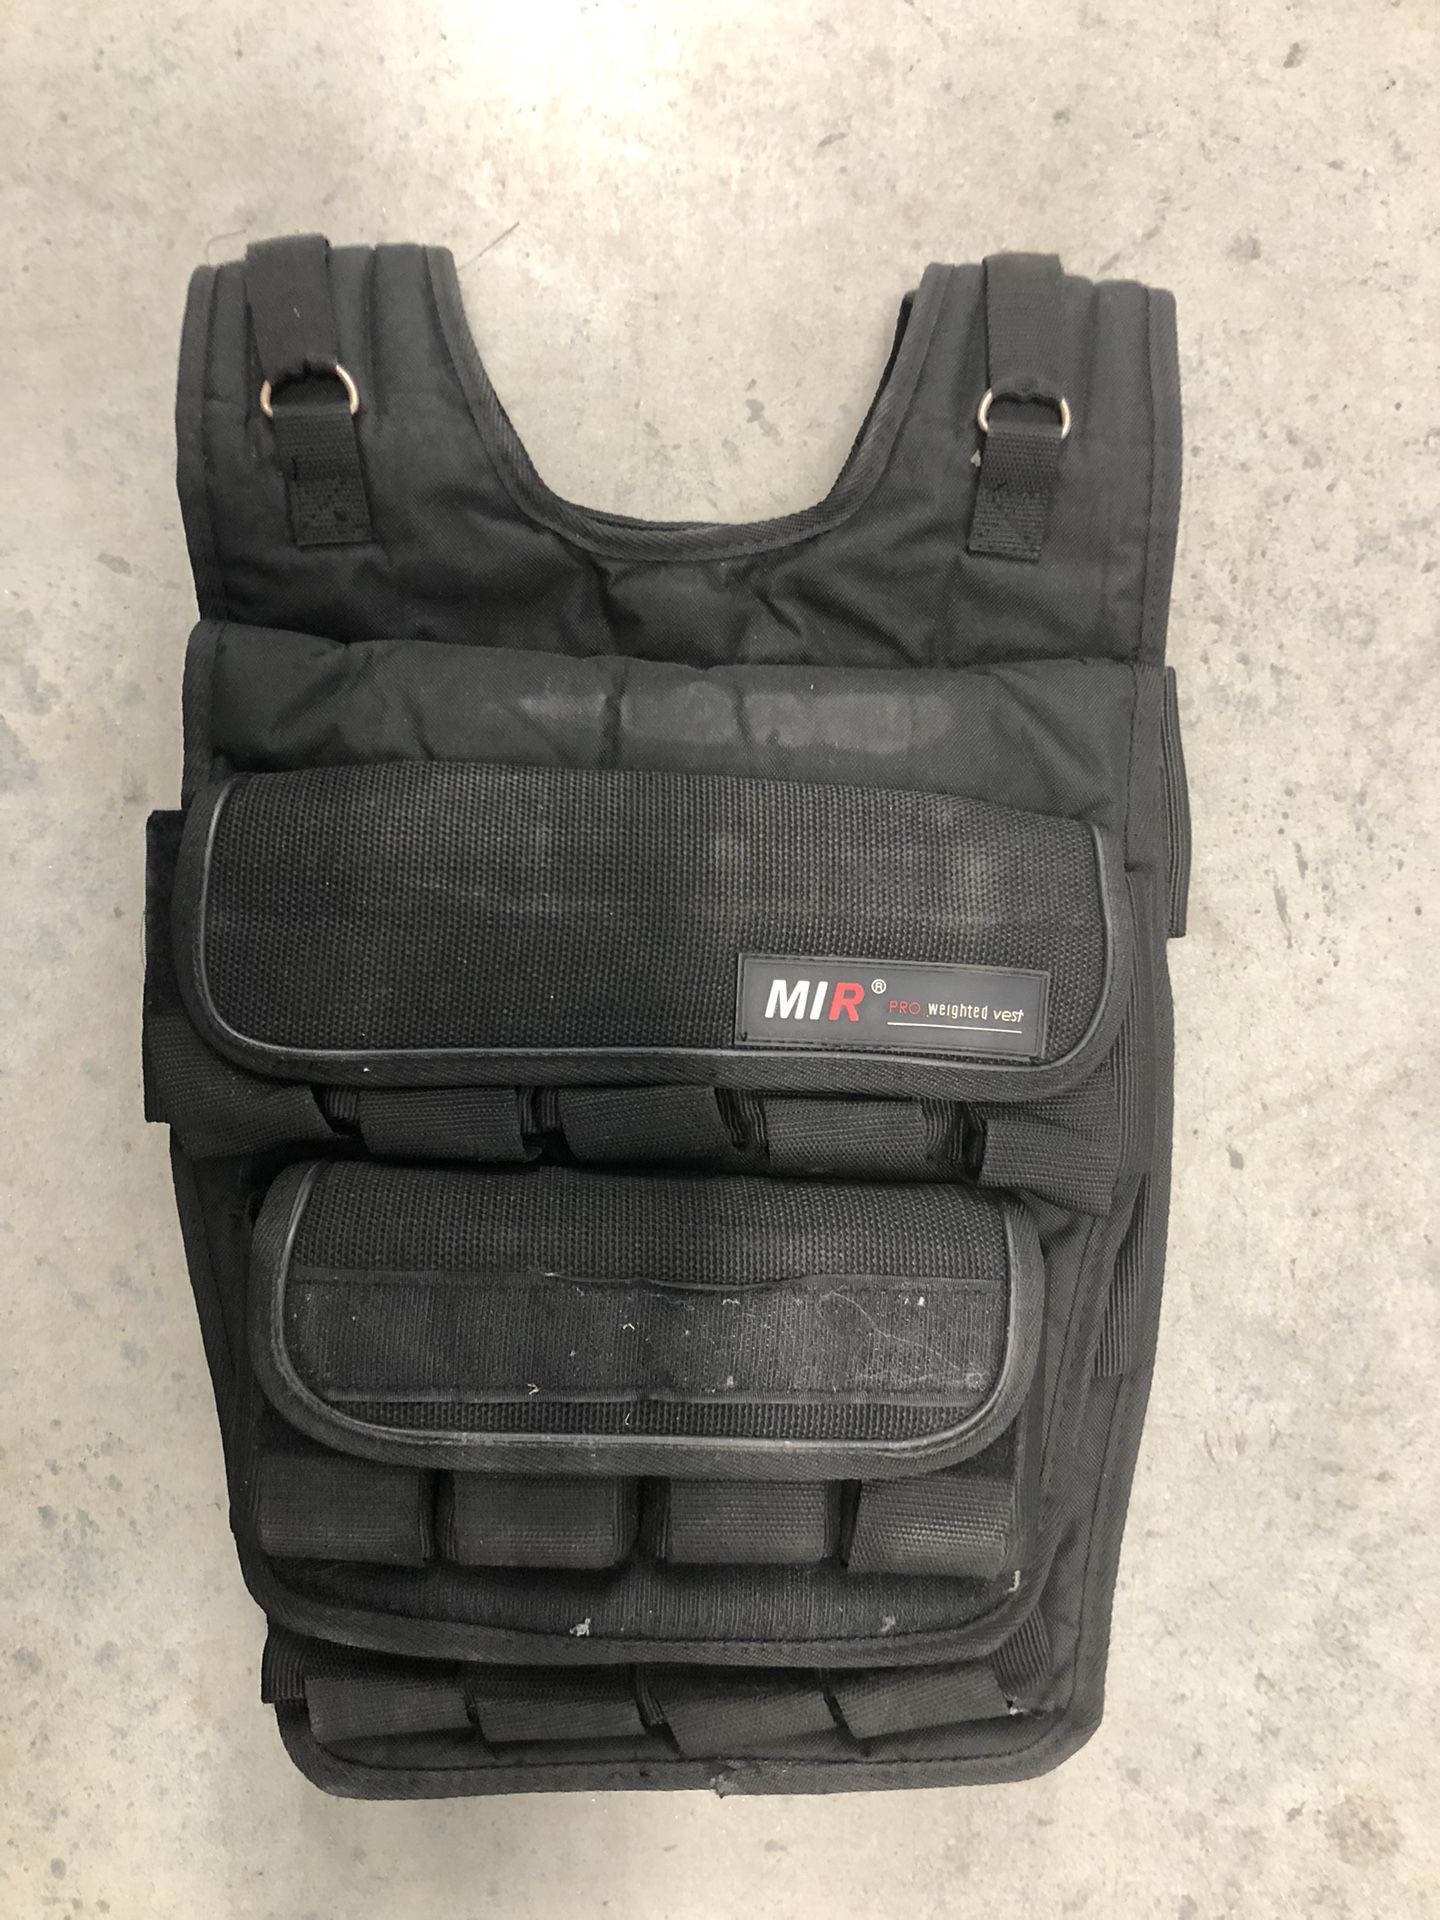 MIR Weighted Vest 46.8 Pounds